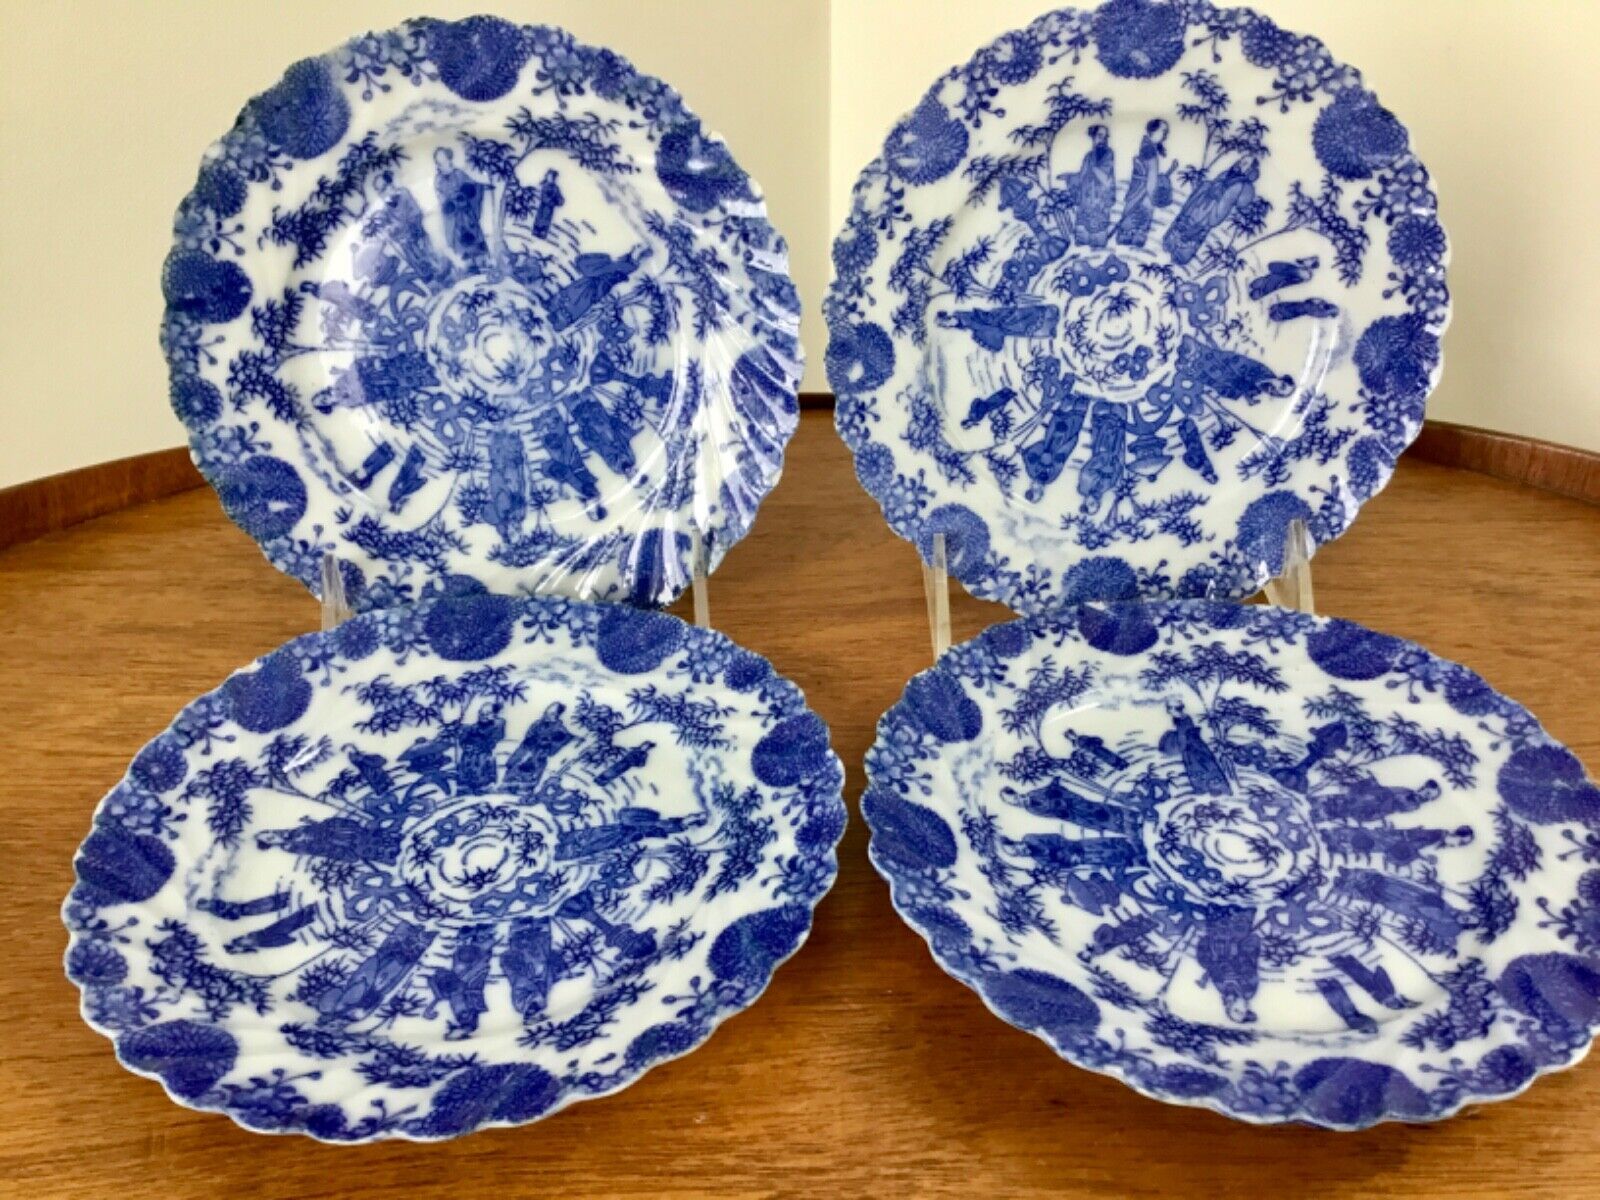  Antique Asian /Chines /Japanese 4 Blue & White Plates Decorated w Sages 6 1/4” Без бренда